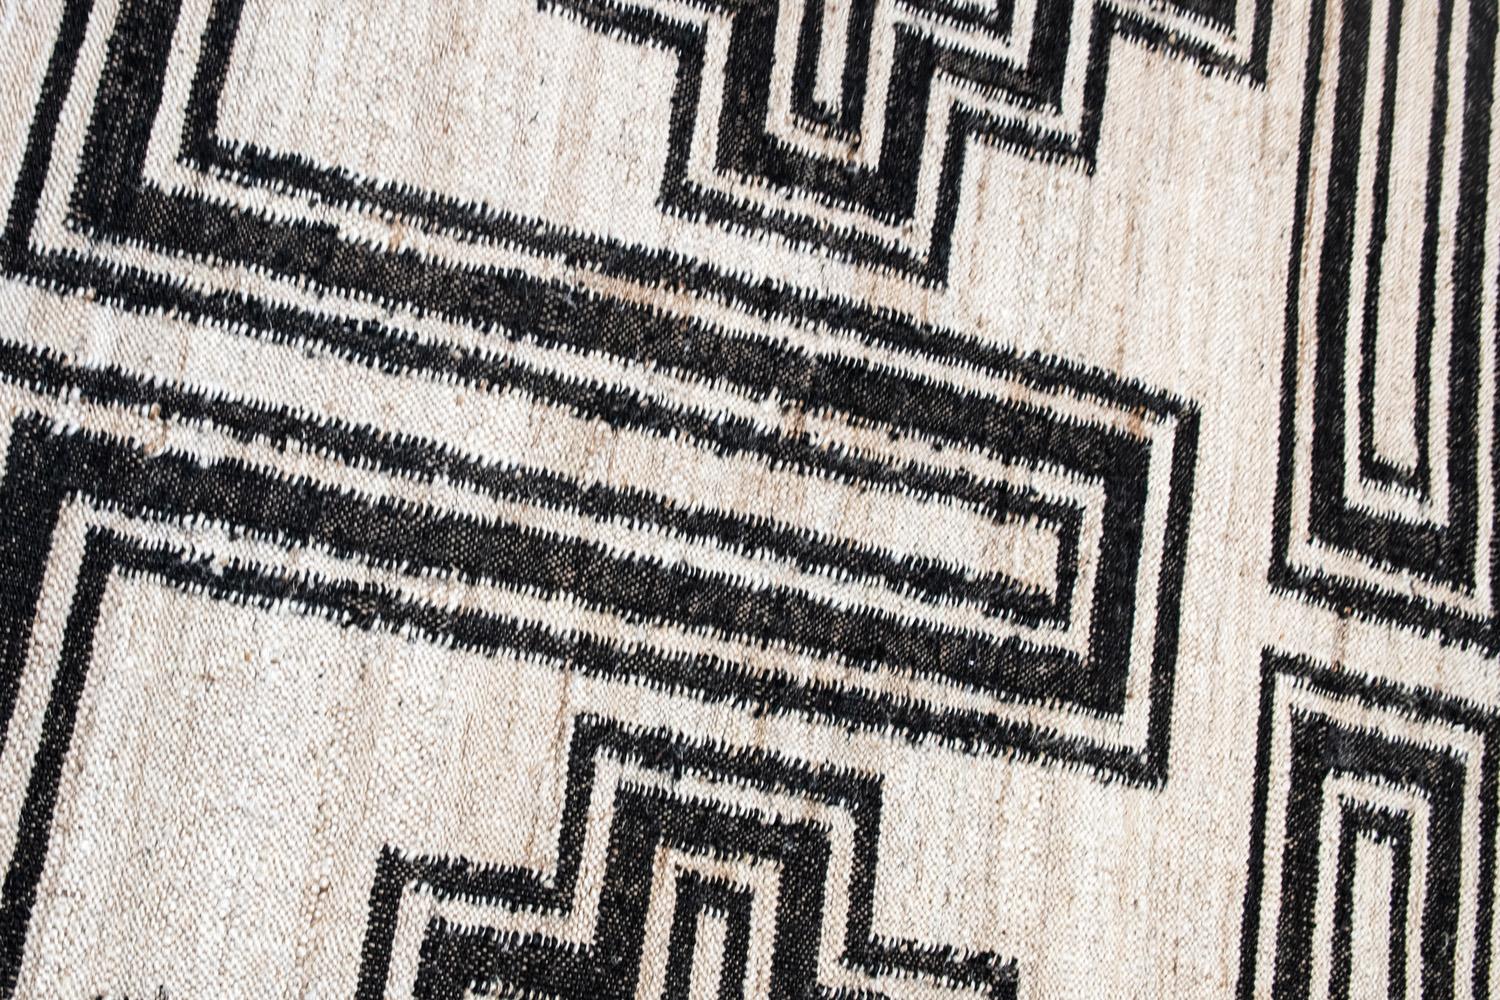 This jute rug has been ethically hand woven in the finest jute yarns by artisans in Northern India, using a traditional weaving technique of this area.
Each rug is handwoven with irregular details to create beautiful imperfections that make each rug